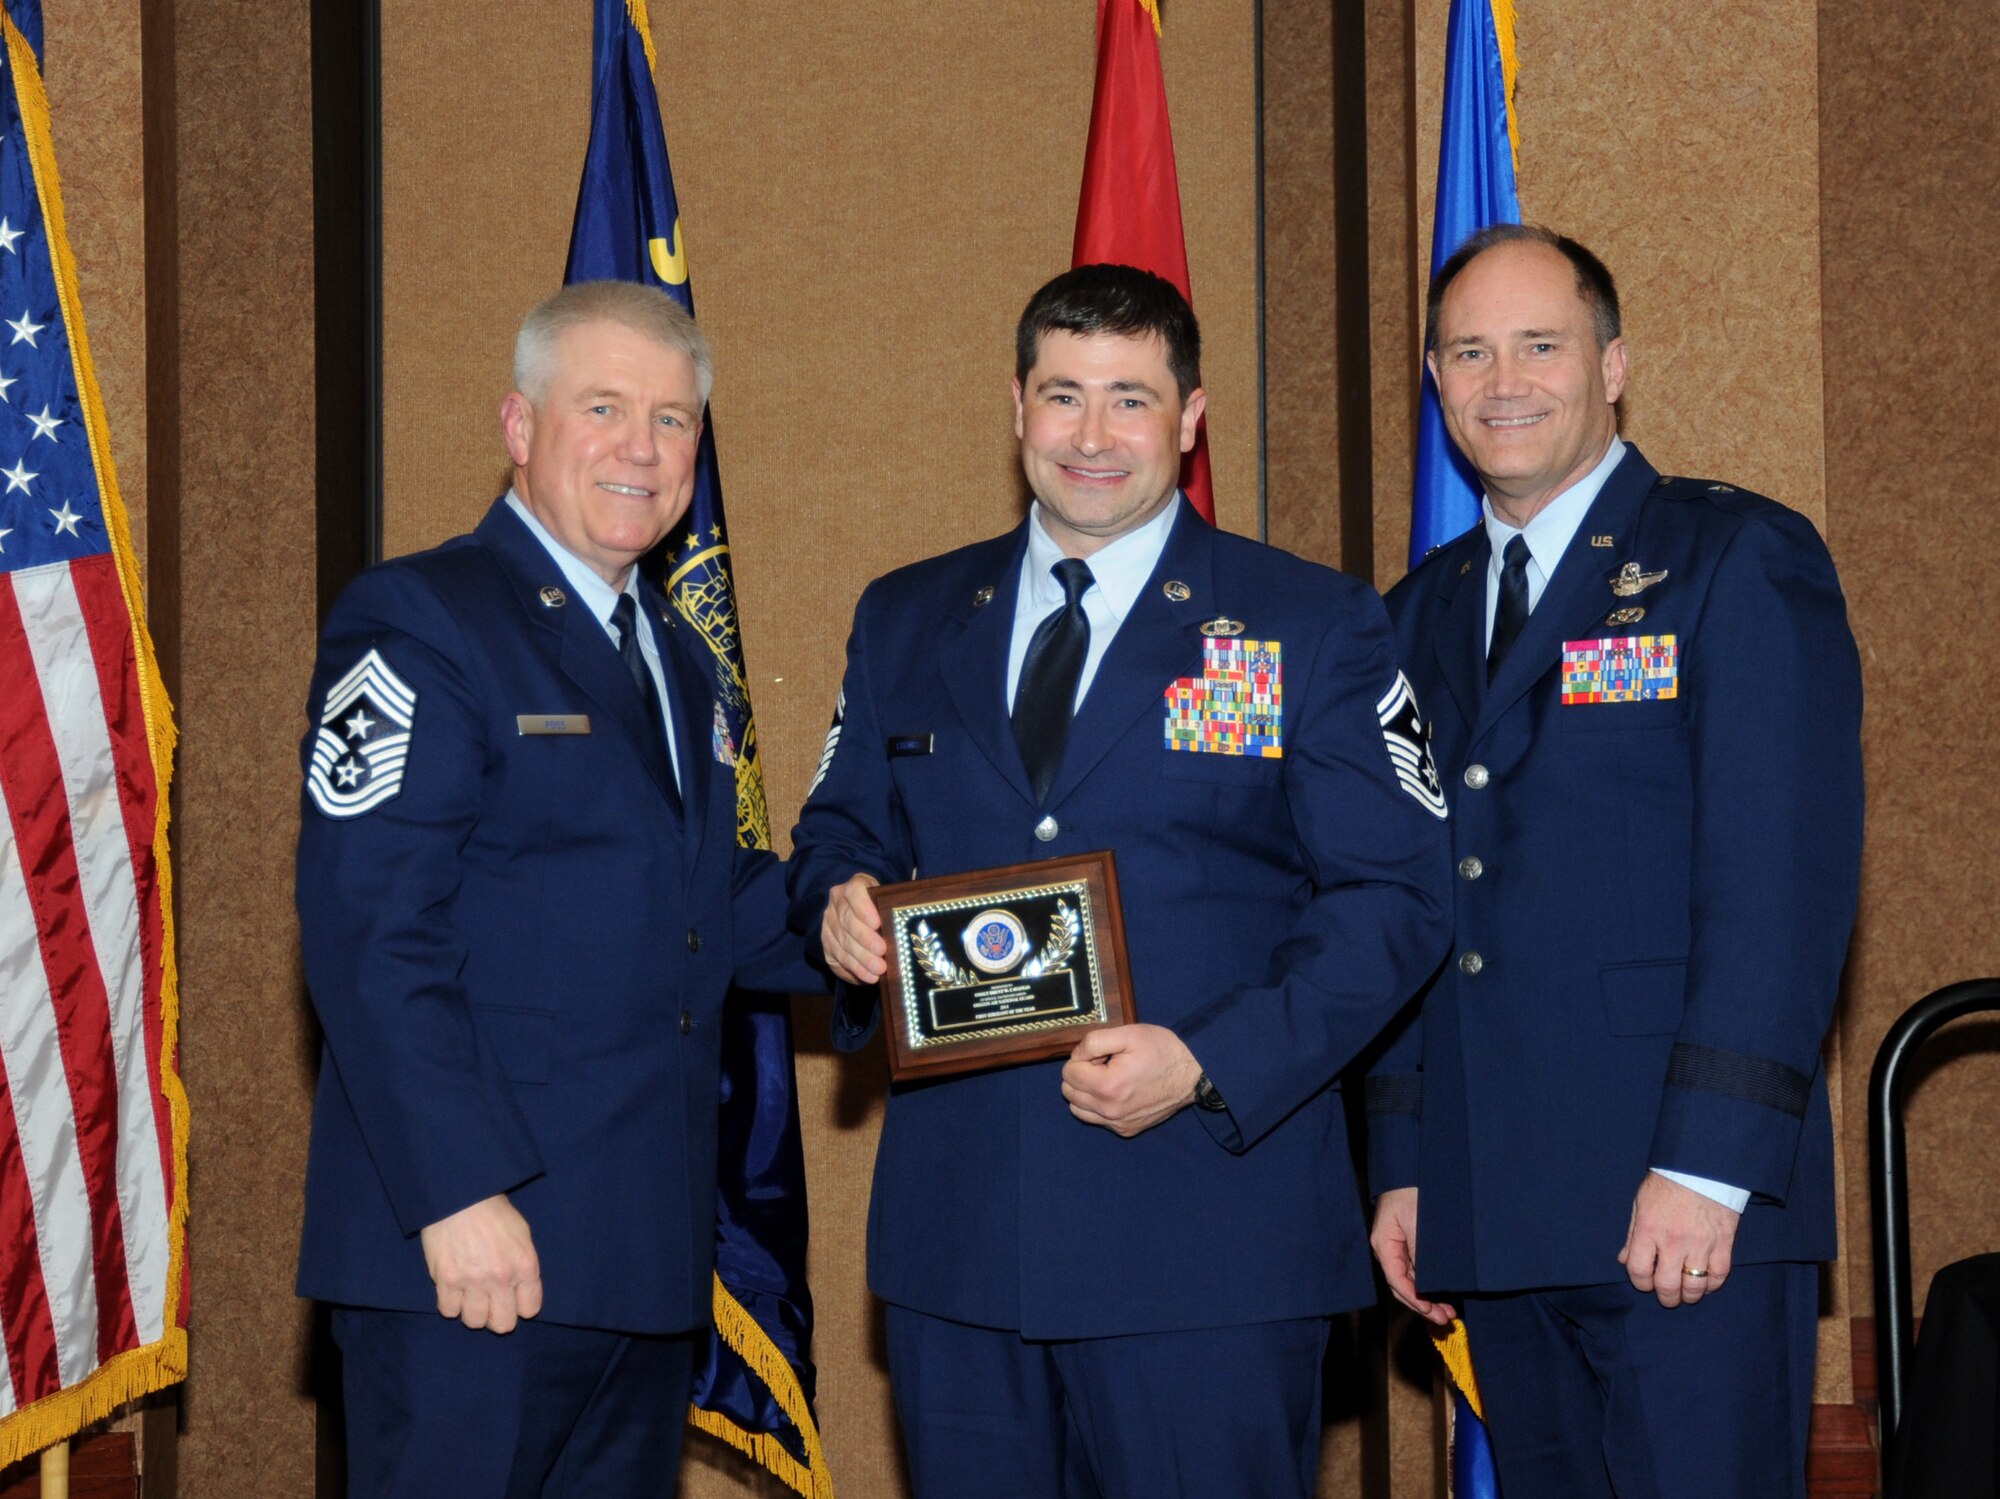 Oregon Air National Guard Senior Master Sgt. Brent Cavanias, assigned to the 125th Special Tactics Squadron, center, is presented with the overall Oregon Air National Guard First Sergeant of the Year  Award, from 173rd Fighter Wing Command Chief Master Sgt. Danny Ross, left, and Air Component Commander Brig. Gen. Michael Stencel, right, during the 21st Annual Oregon Air National Guard Awards Banquet, March 14, 2015, Portland, Ore. (U.S. Air National Guard photo by Tech. Sgt. Emily Thompson, 142nd Fighter Wing Public Affairs/Released)